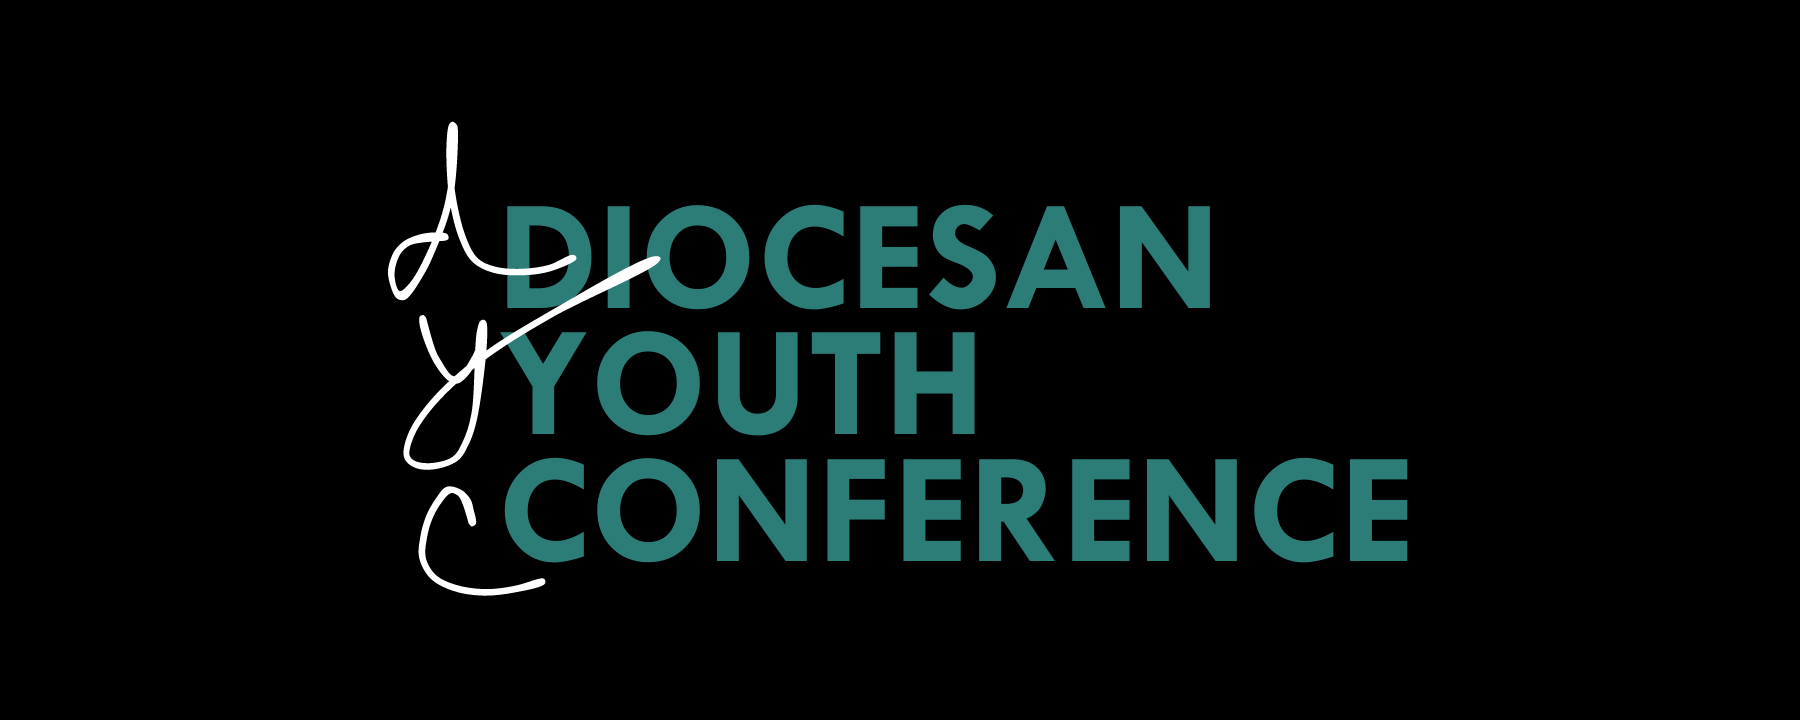 Diocesan Youth Conference